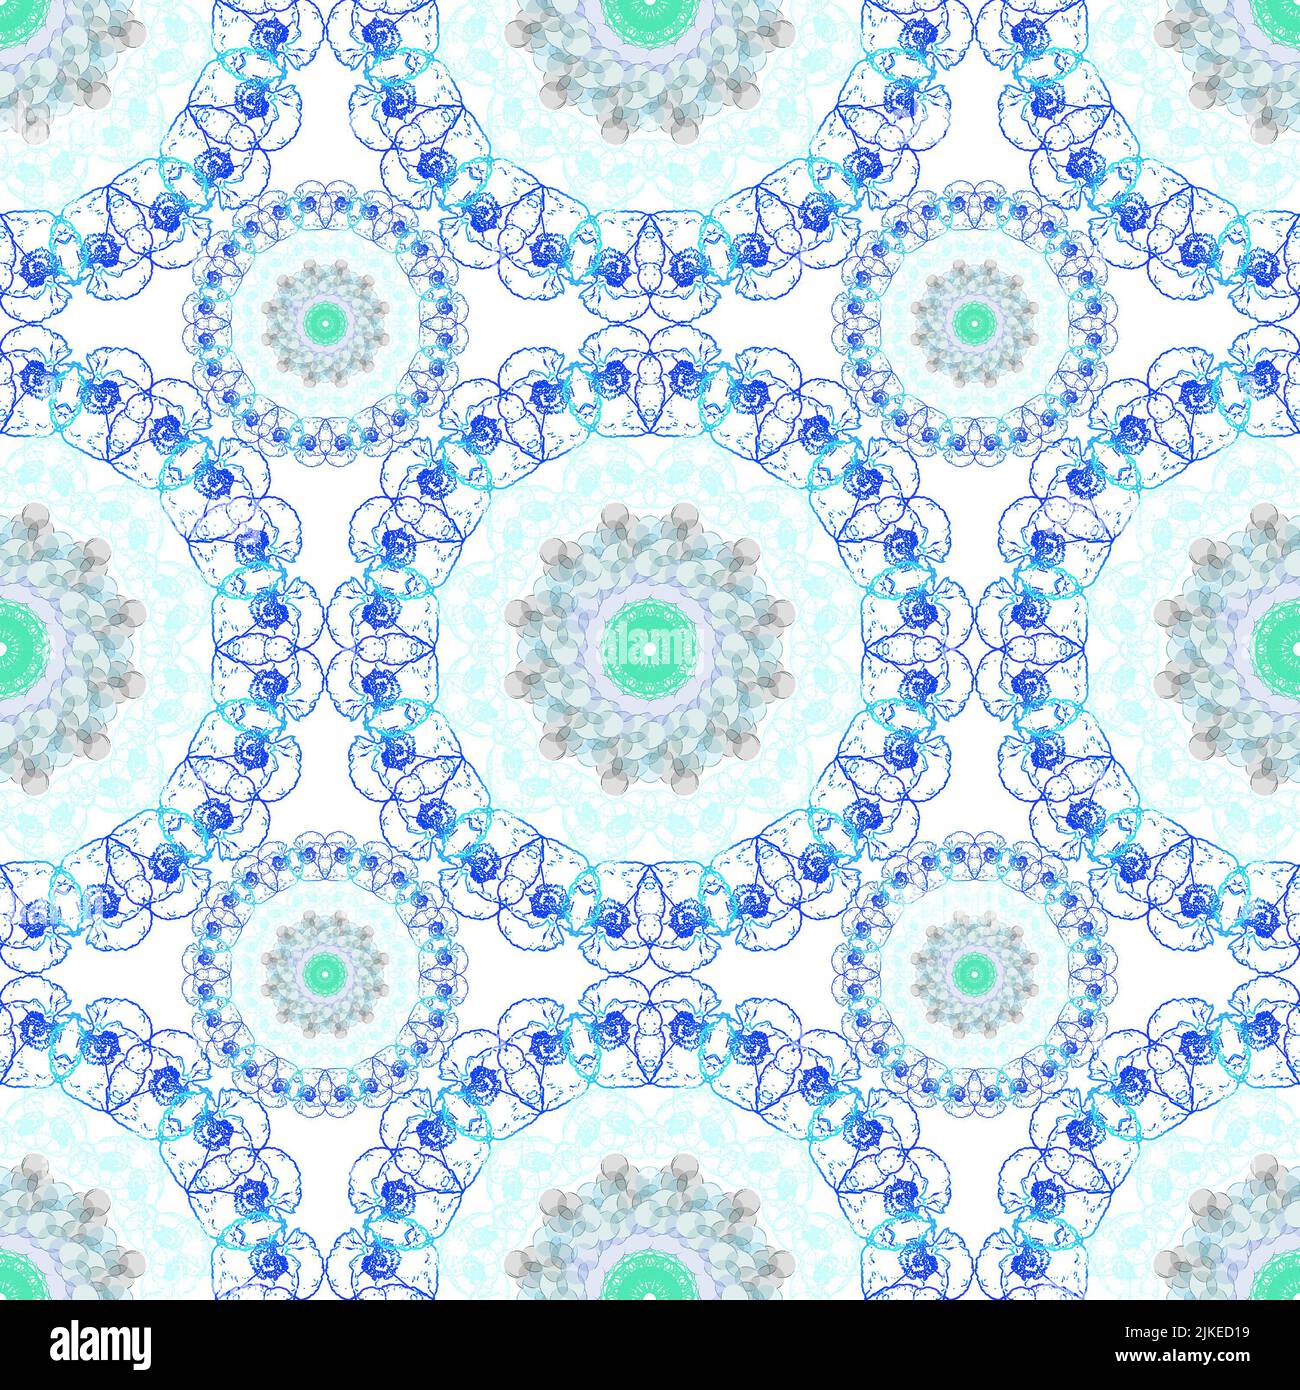 Repeating pattern mandala circles large and small with floral outline on circle and soft interior pattern. Stock Photo